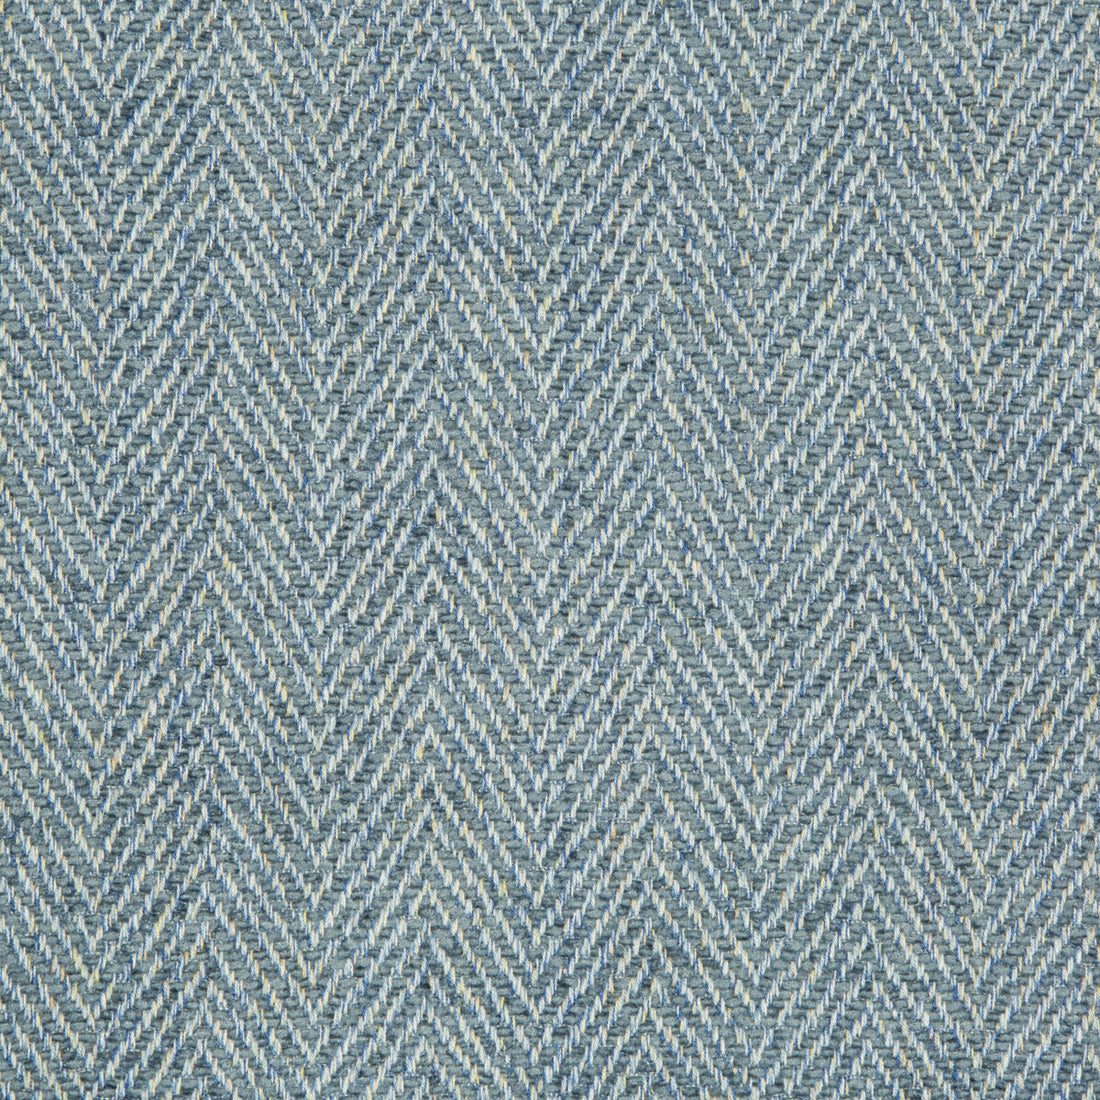 Firle Chenille II fabric in cadet color - pattern 8017140.5.0 - by Brunschwig &amp; Fils in the Baronet collection